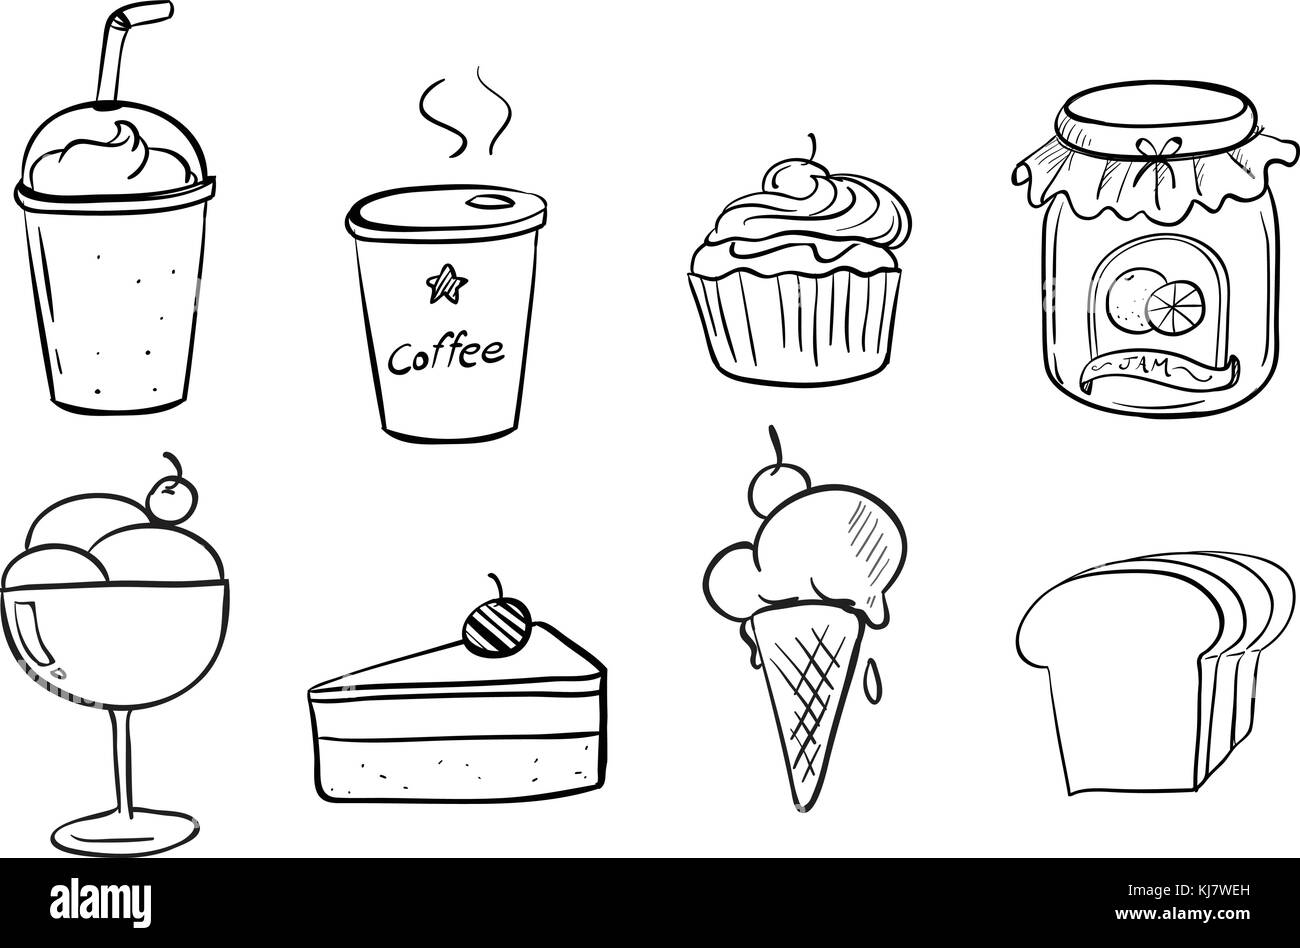 Illustration of the different foods with drinks on a white background Stock Vector